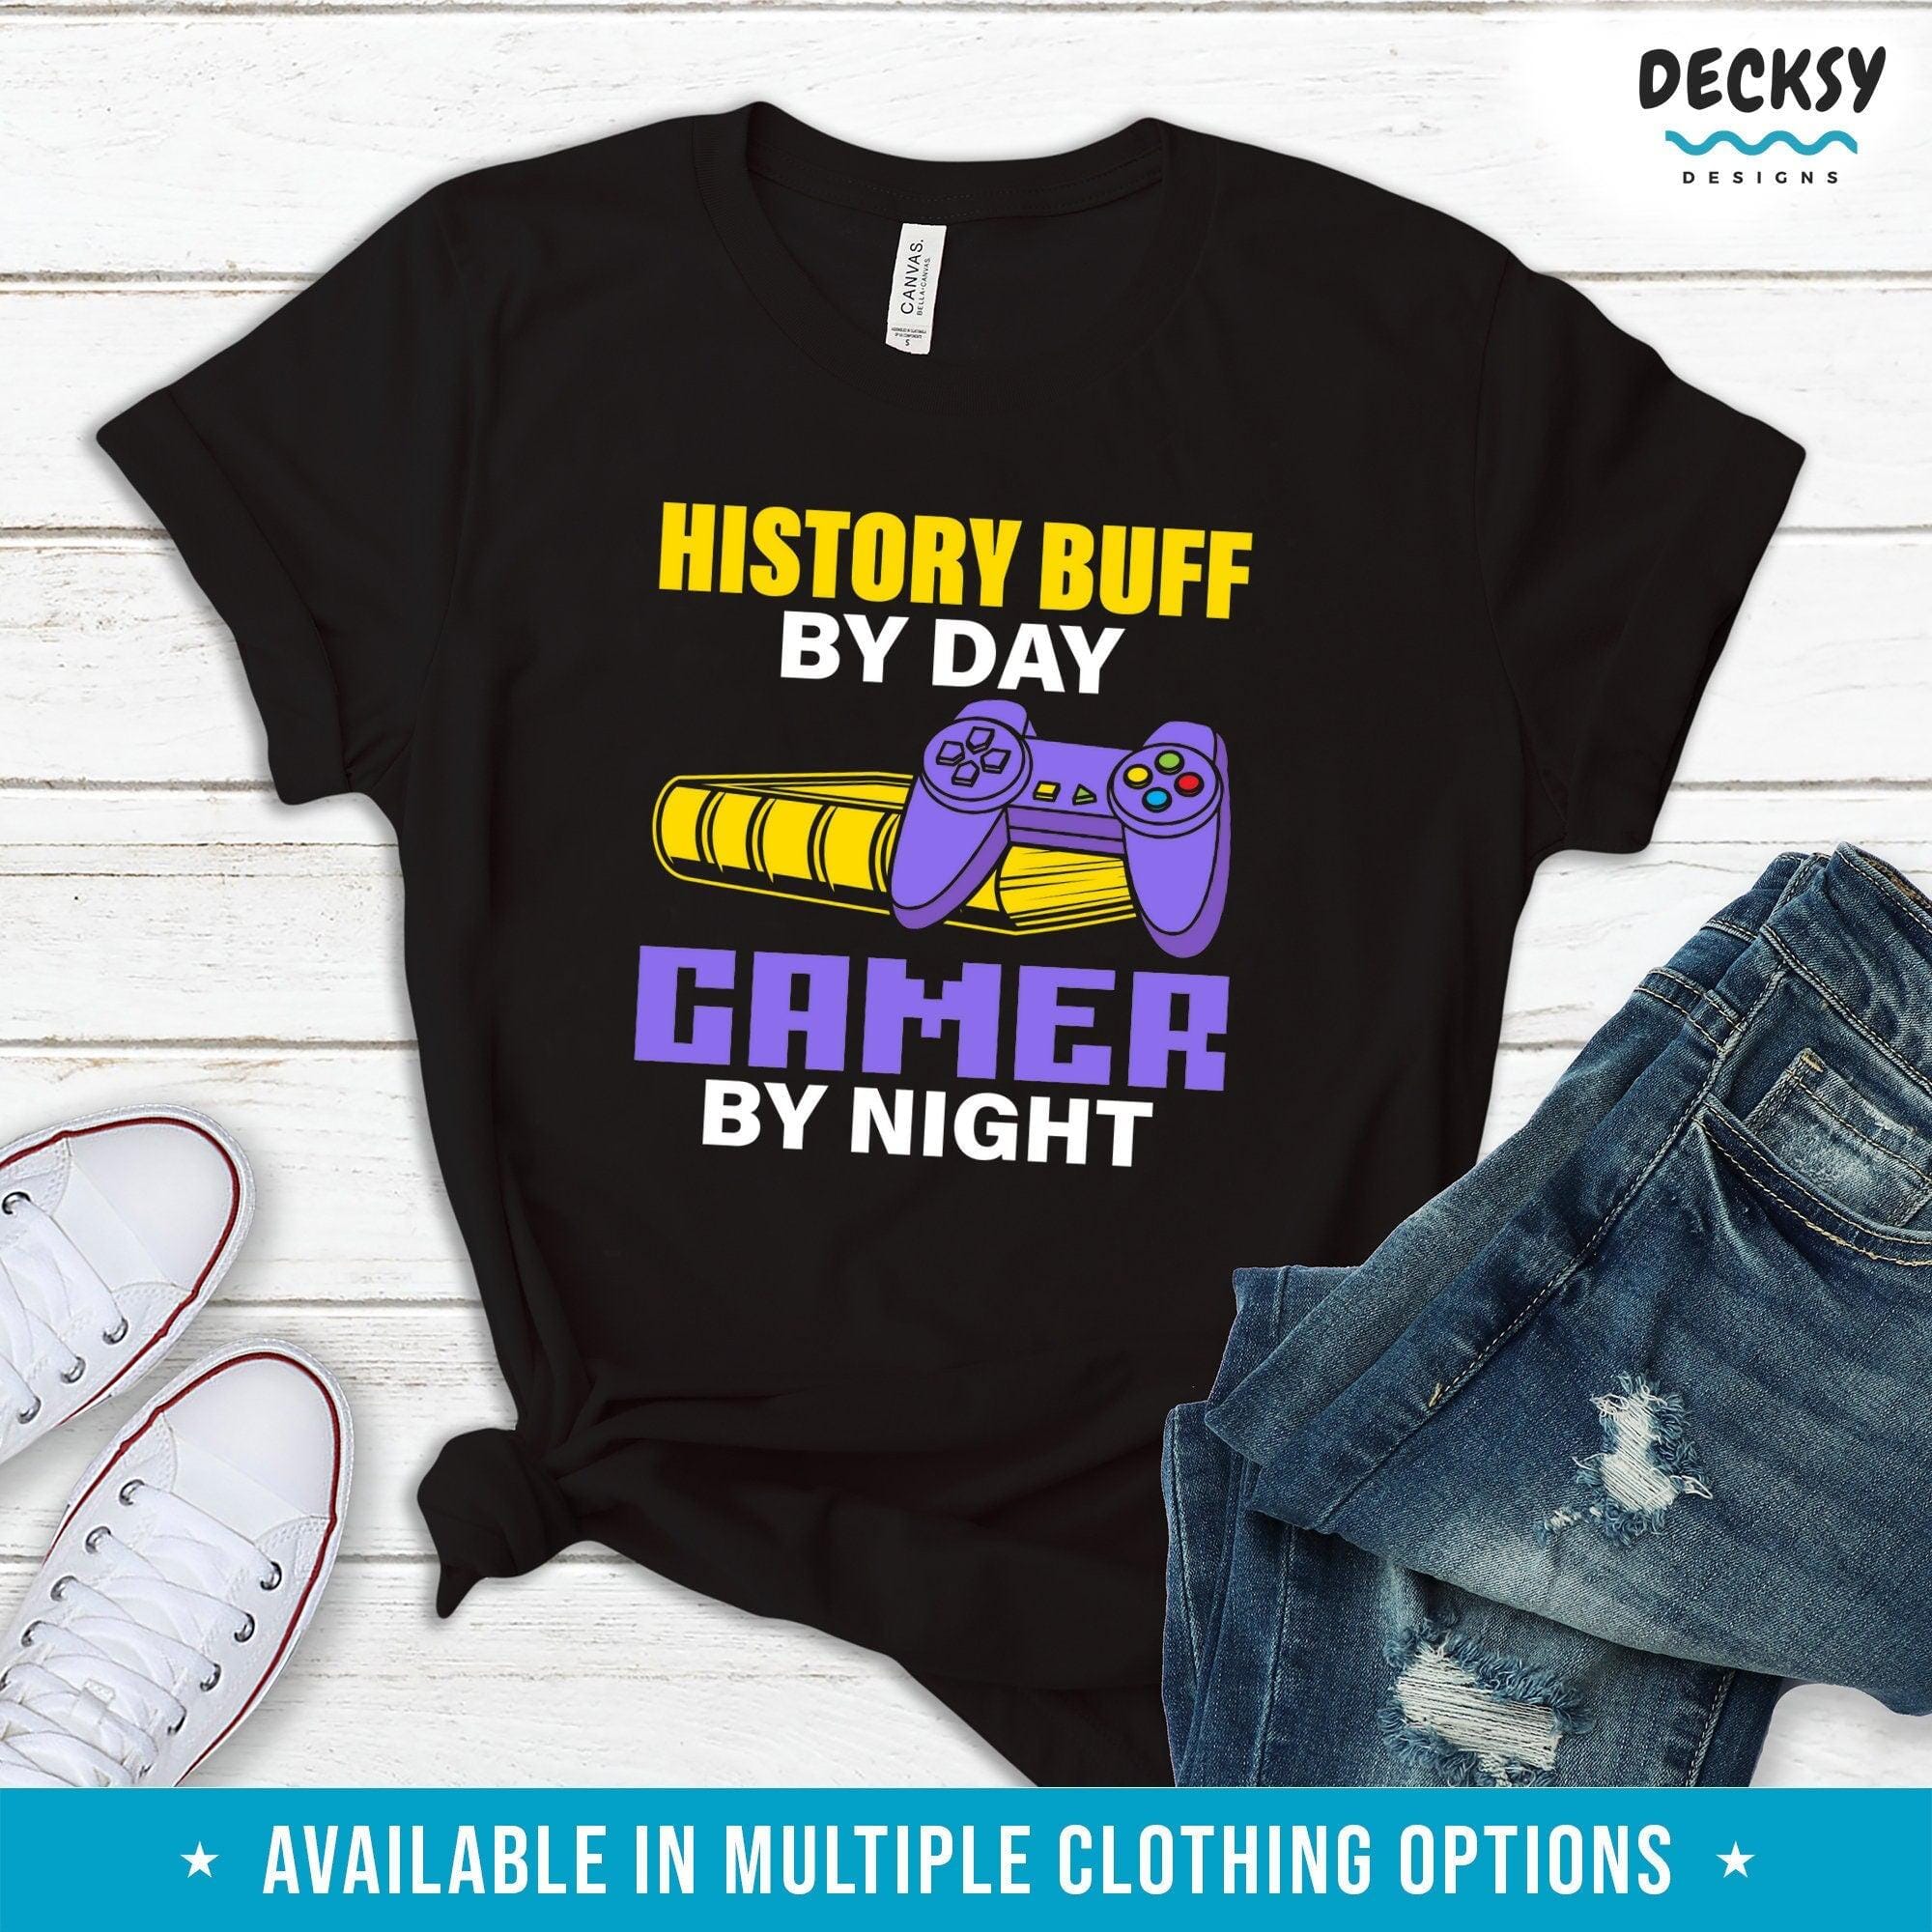 History Buff T-Shirt, Funny Gamer Gift-Clothing:Gender-Neutral Adult Clothing:Tops & Tees:T-shirts:Graphic Tees-DecksyDesigns